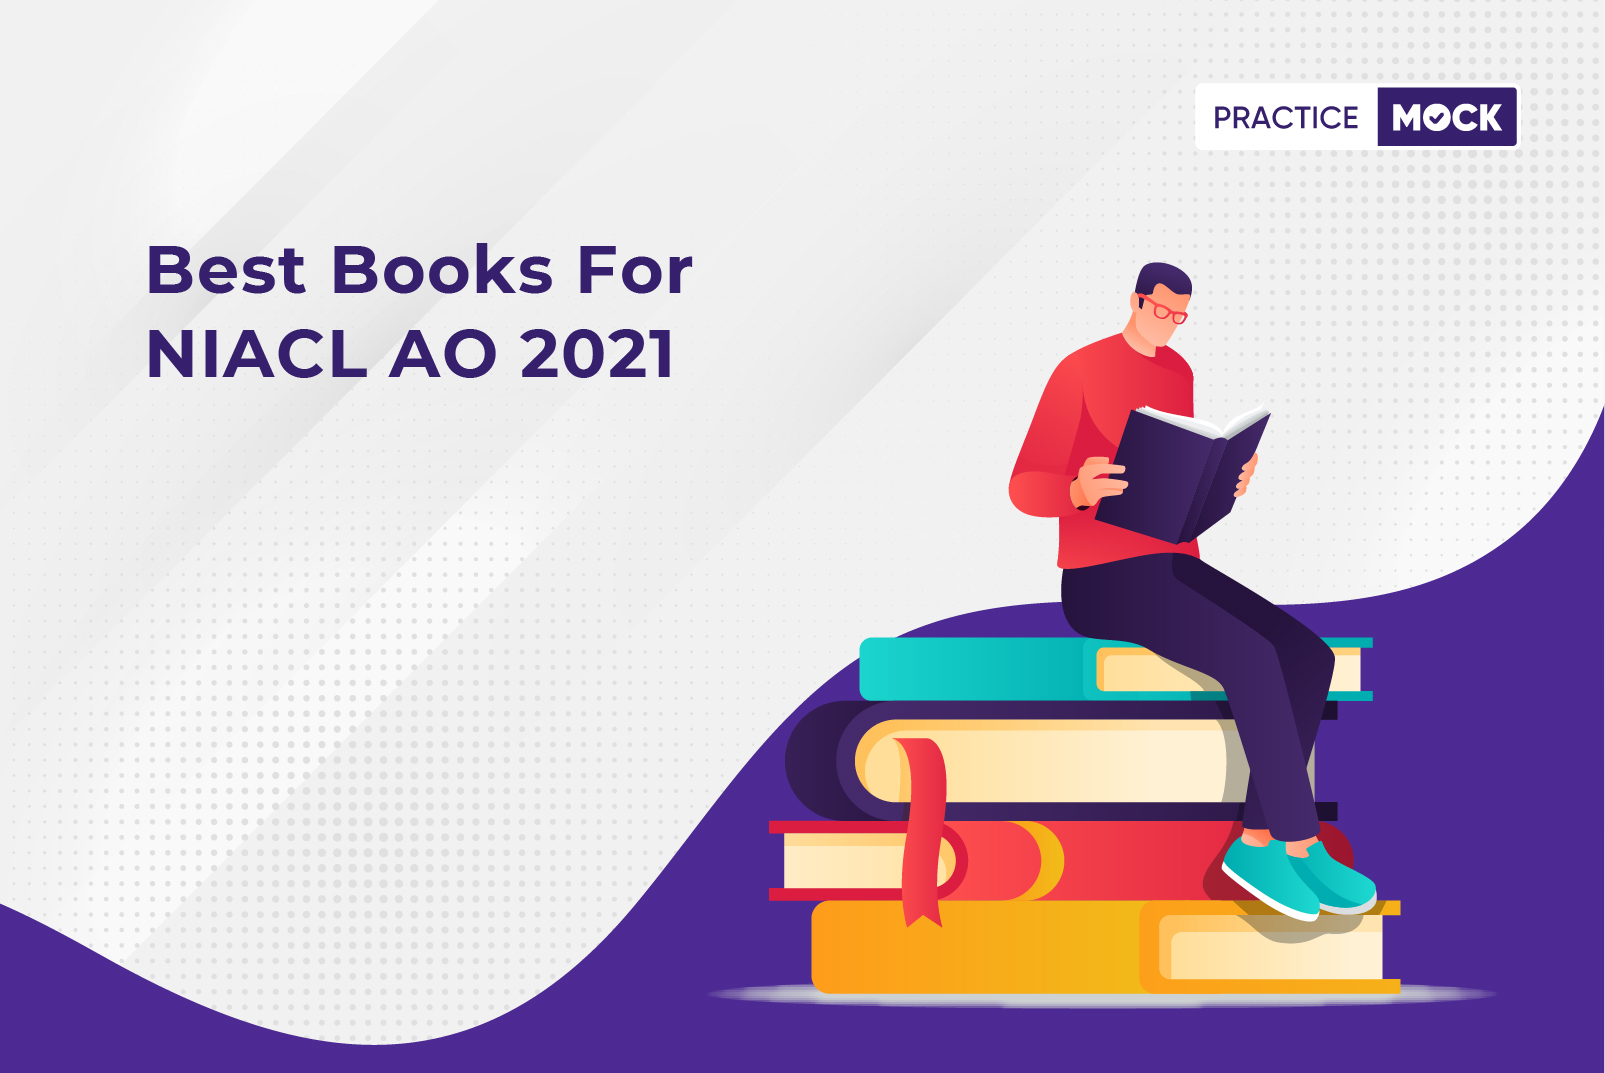 Best books for NIACL AO 2021